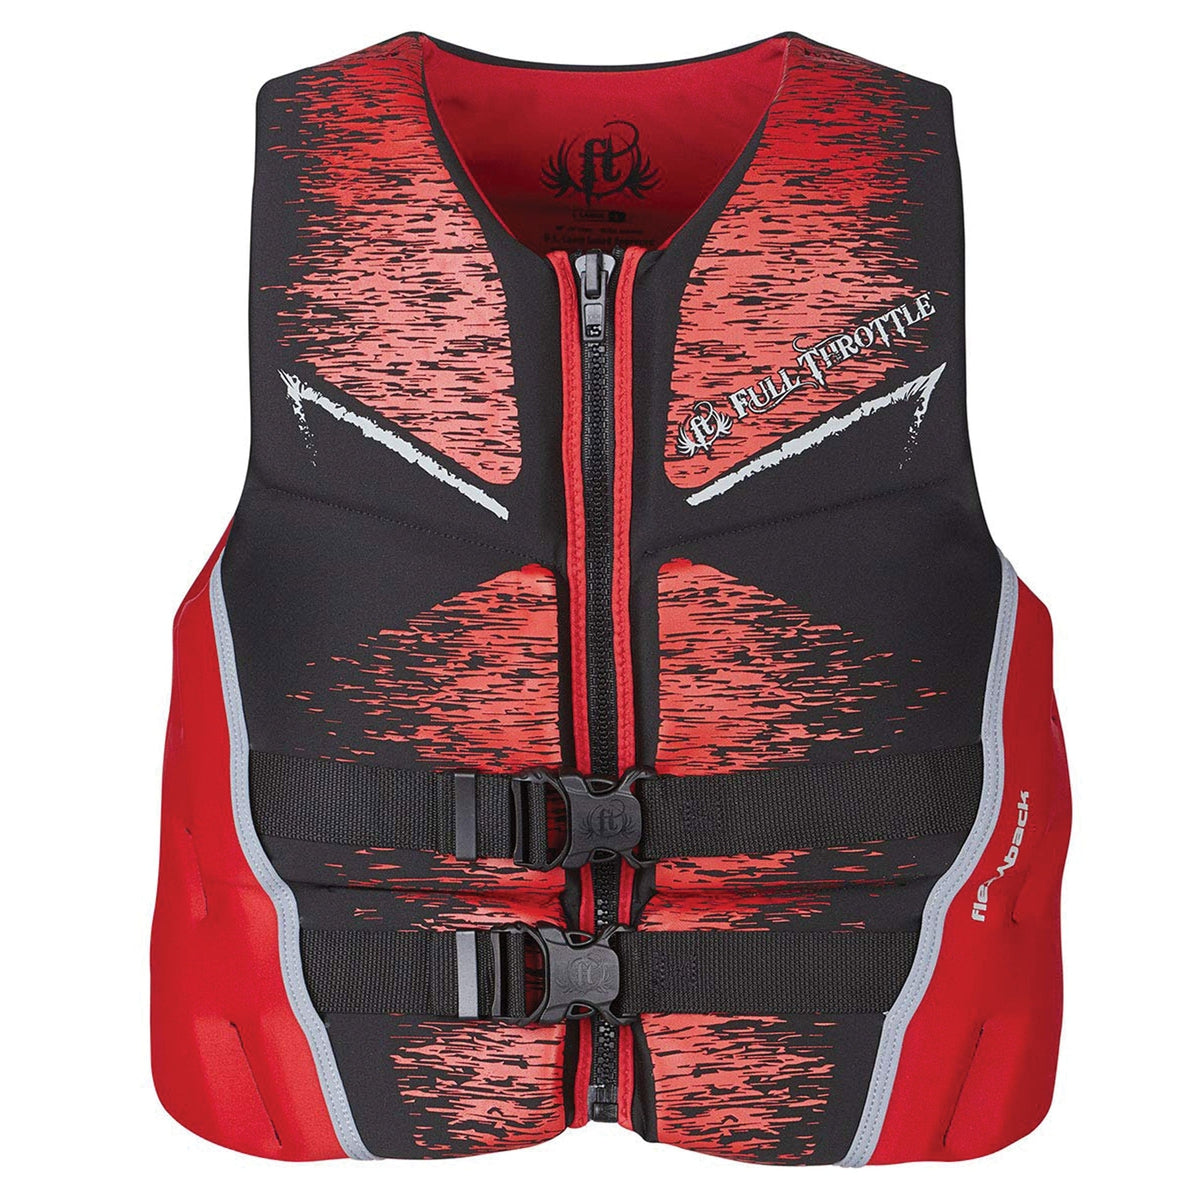 Full Throttle Qualifies for Free Shipping Full Throttle Vest XL Red Rapid Dry #142500-100-050-19